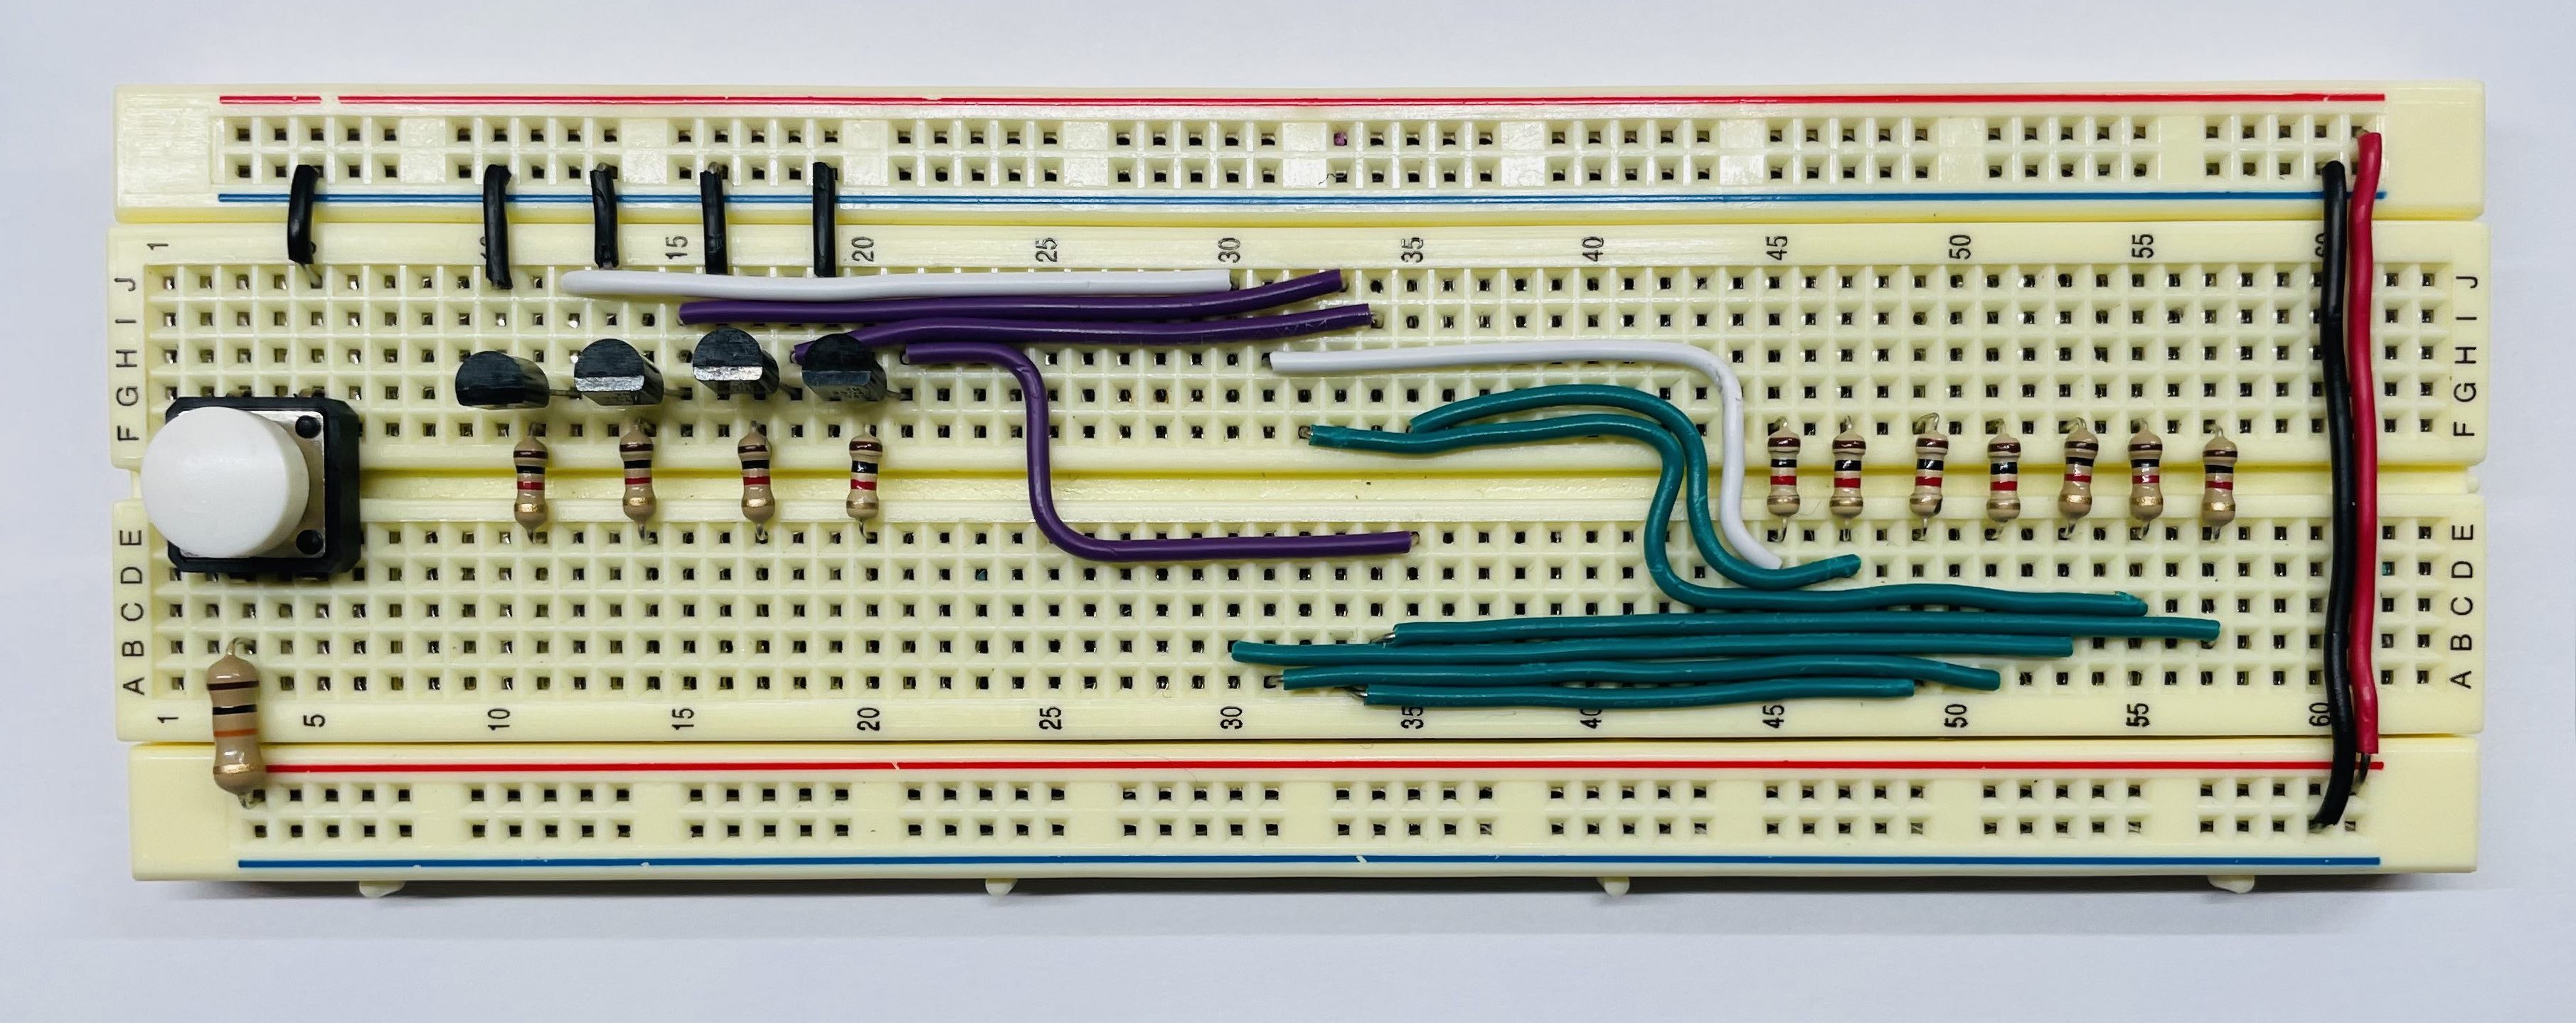 Wired breadboard with components